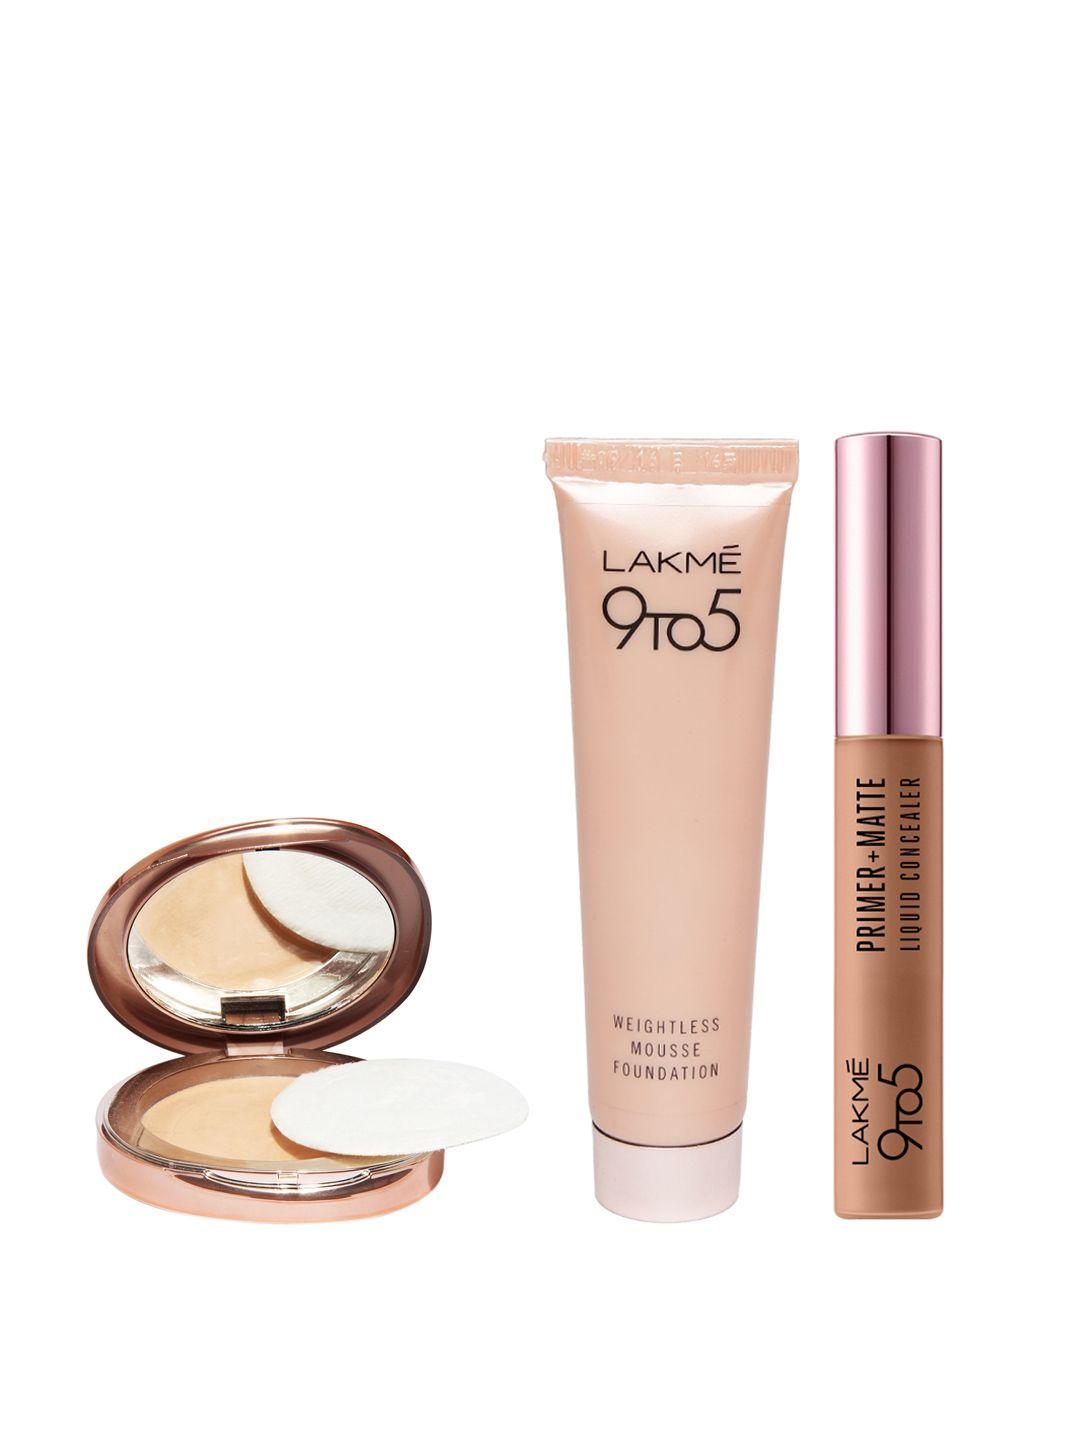 lakme set of 9to5 liquid concealer & compact with mousse foundation